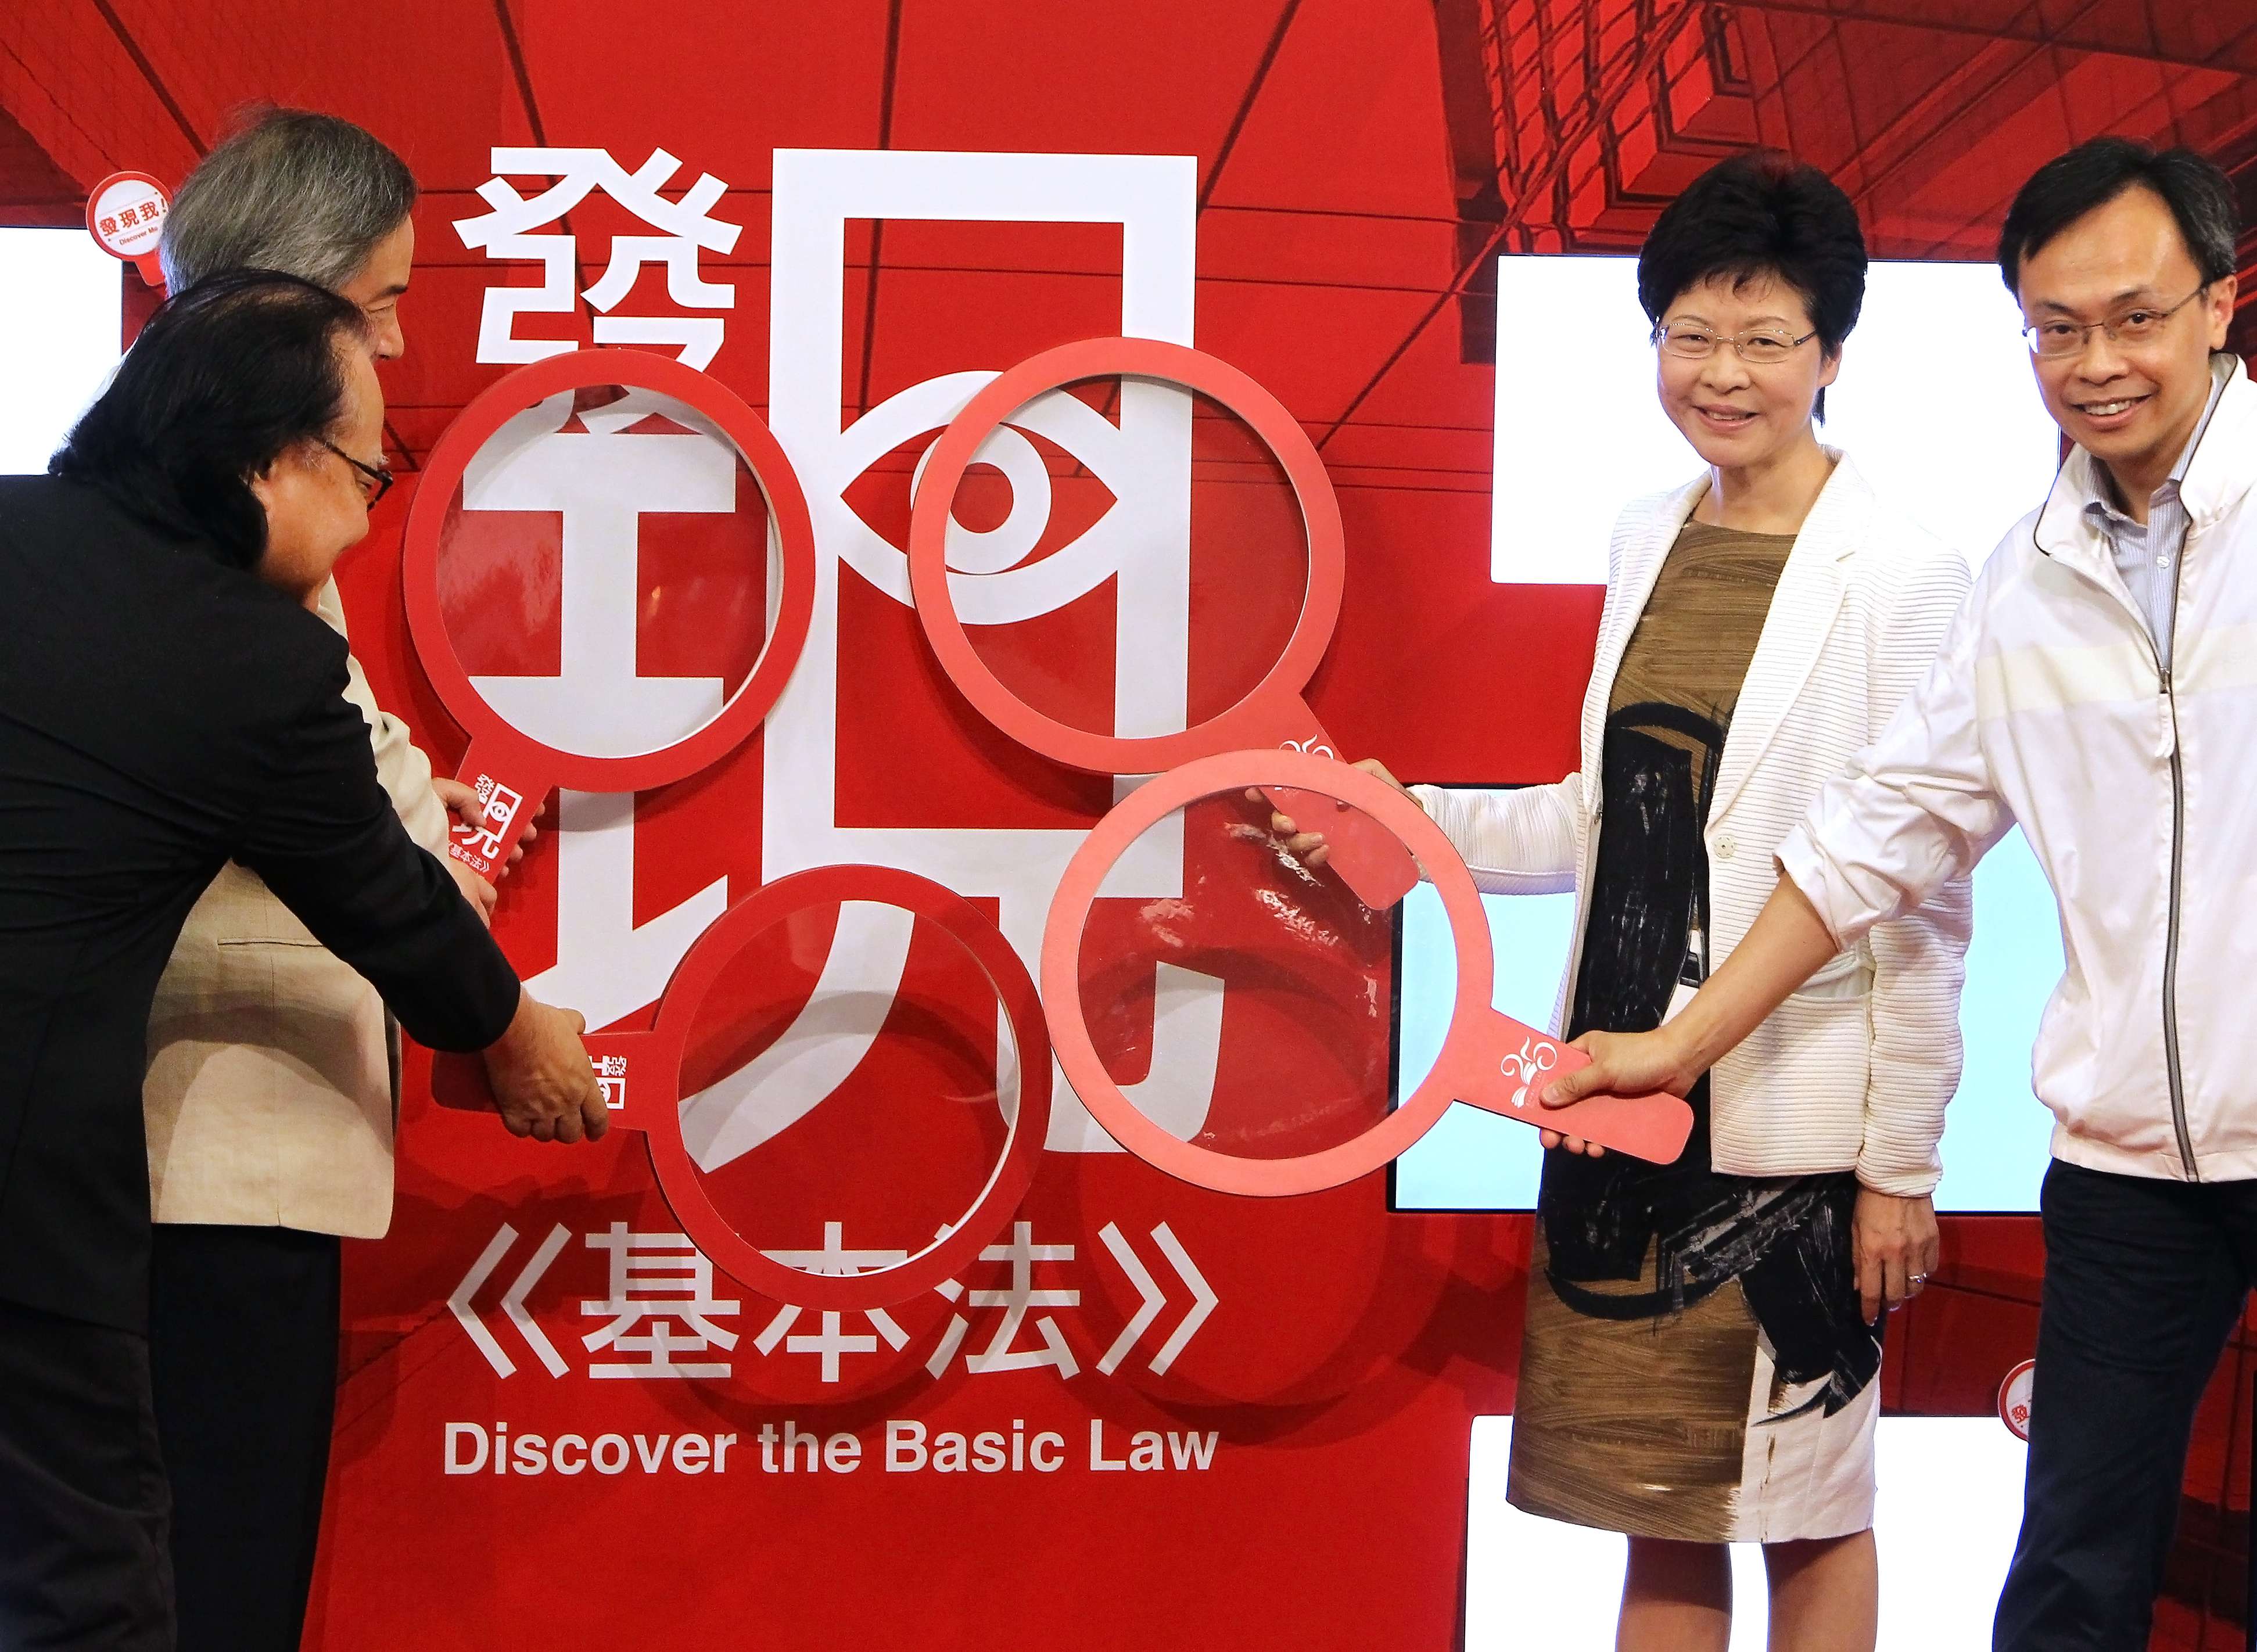 Chief Secretary Carrie Lam attends the opening ceremony of a multimedia interactive art exhibition on the Basic Law, as part of the celebrations last year to mark the 25th anniversary of the promulgation of the mini constitution. Photo: Franke Tsang